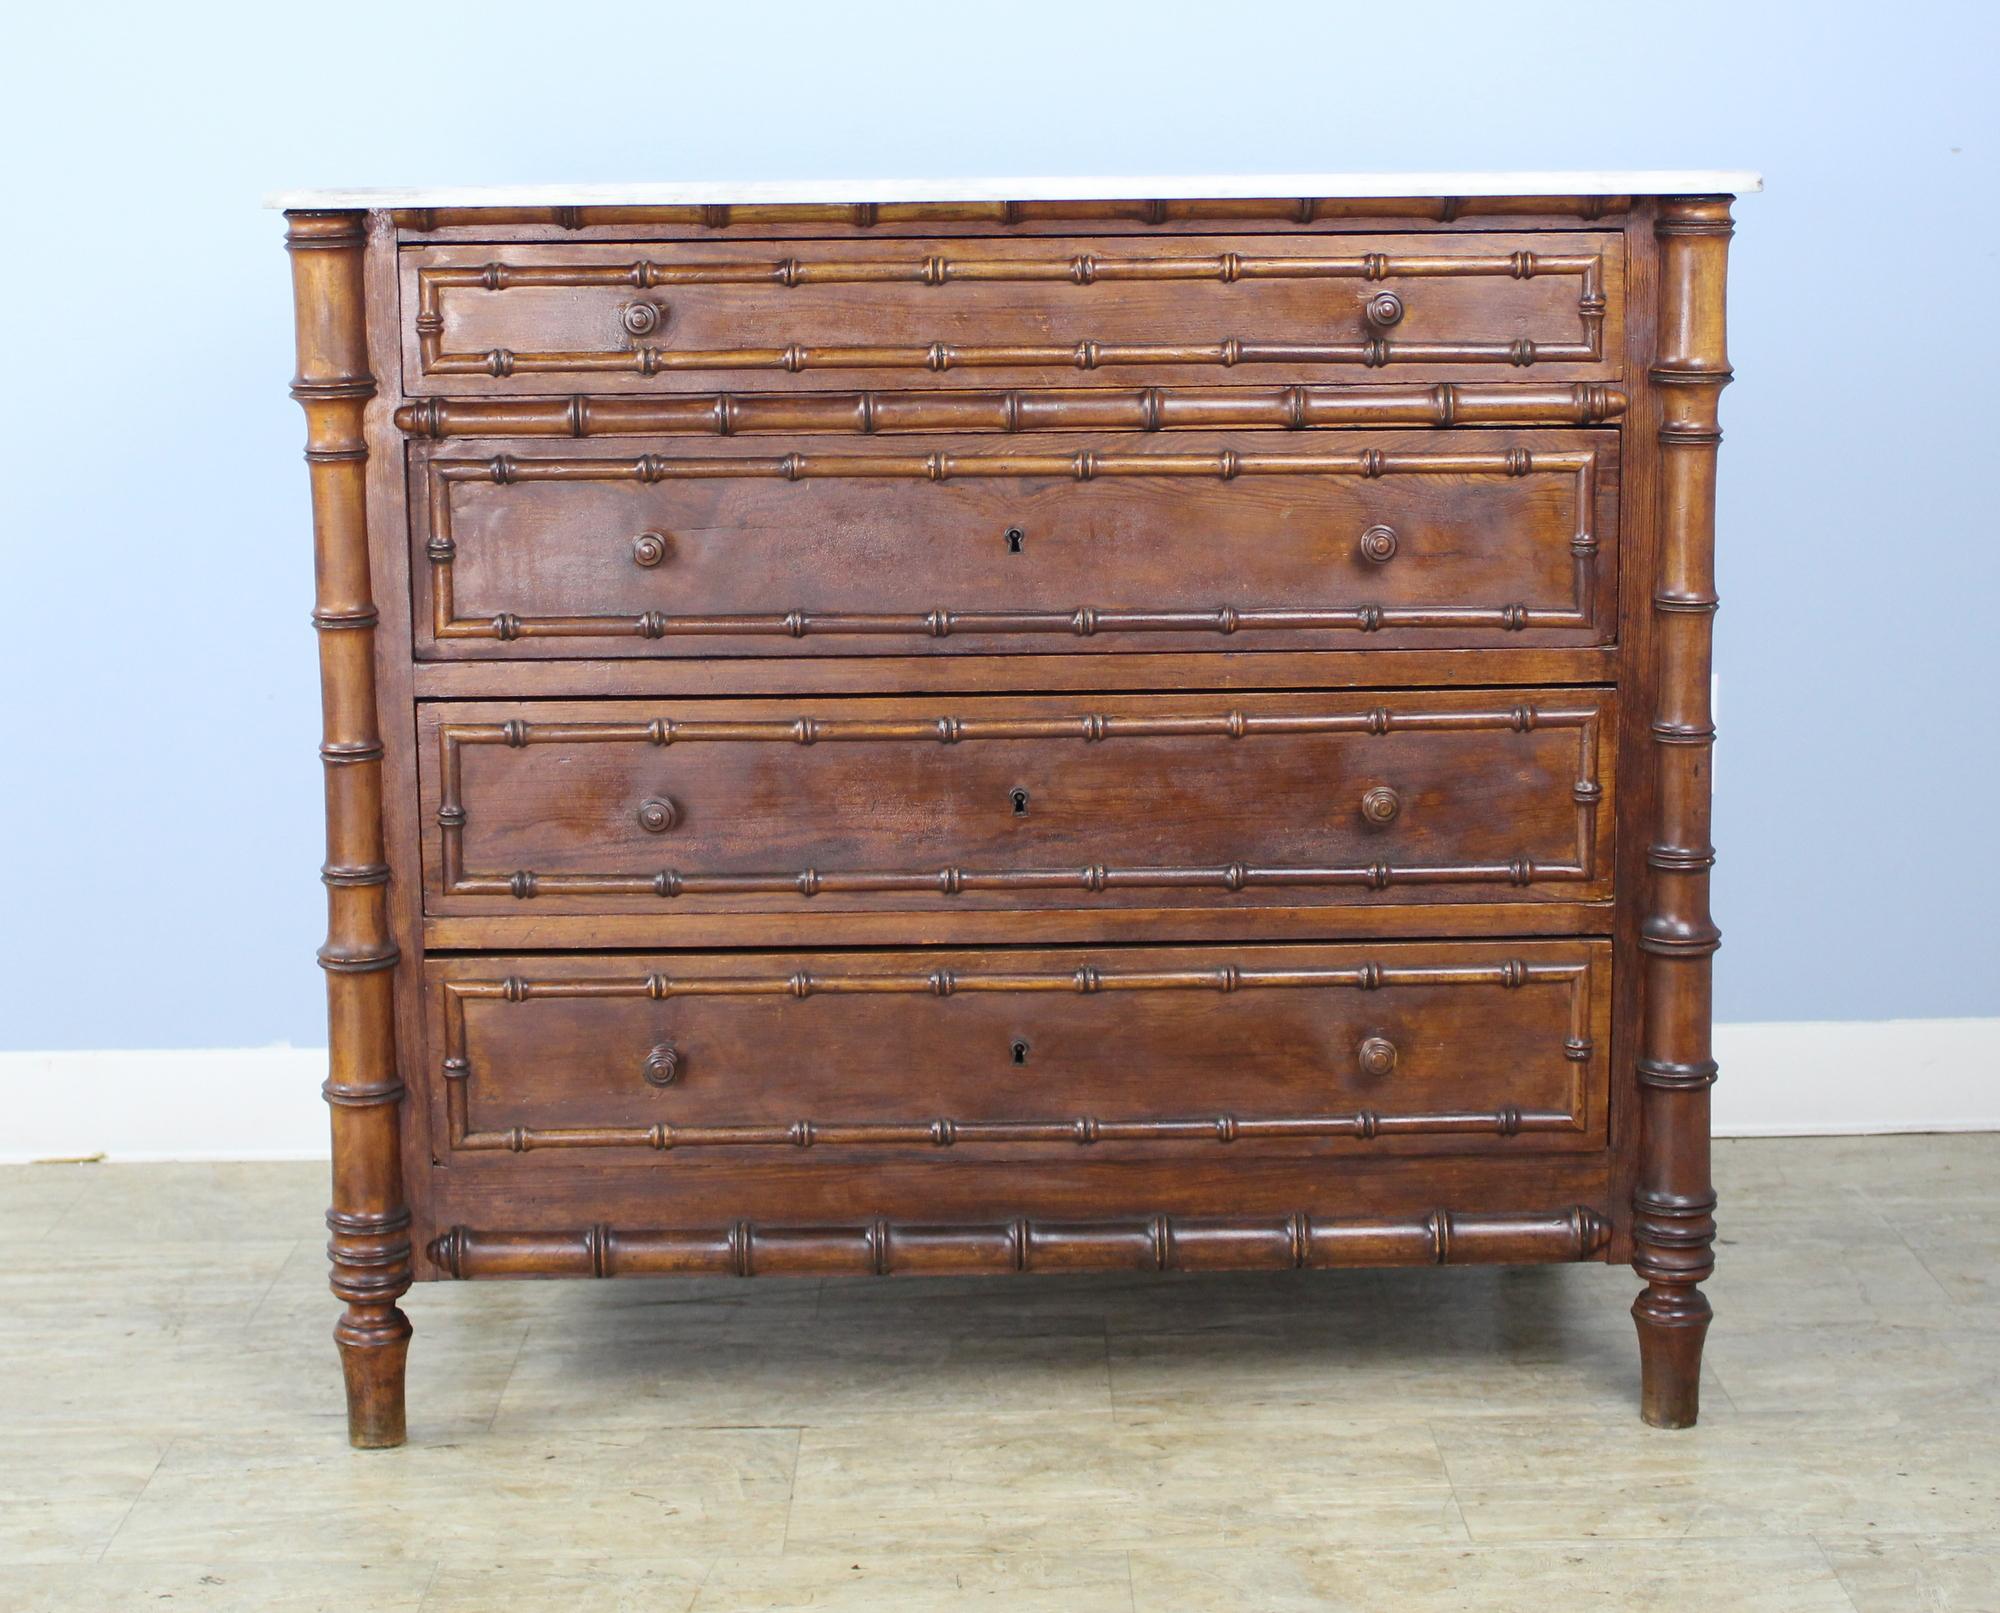 A charming chest of drawers with faux bamboo columns and mouldings. Four roomy drawers. The marble which is original is in good antique condition.